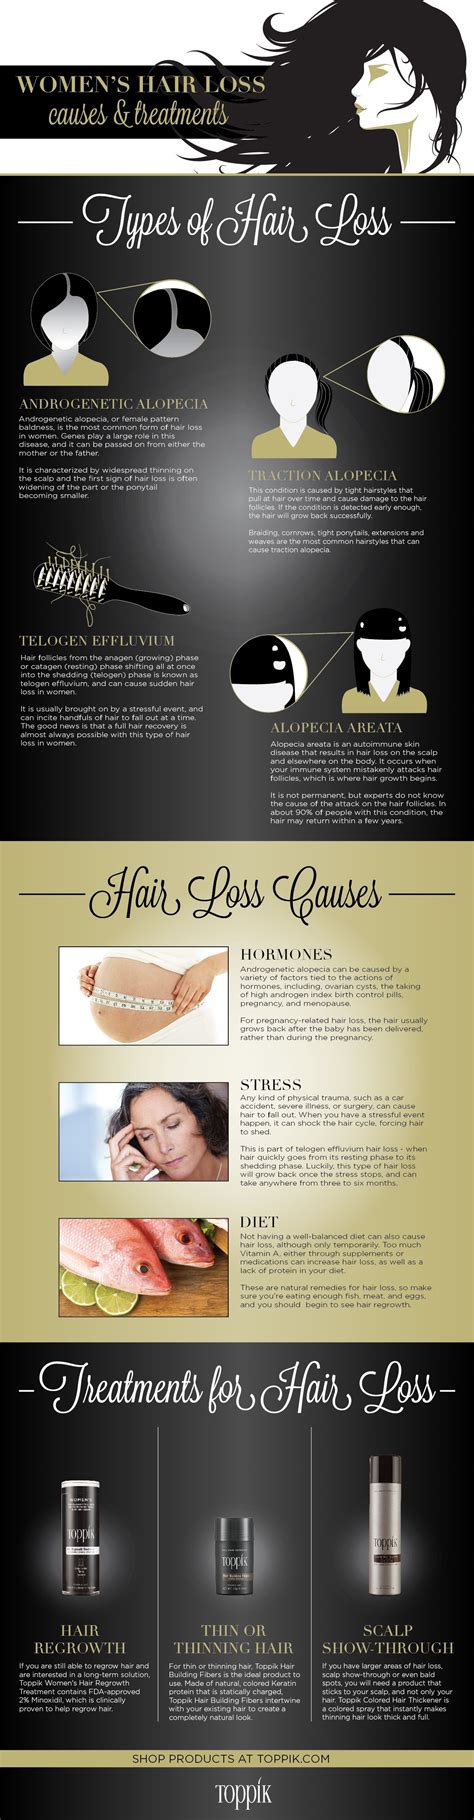 Hair Loss In Women: What You Should Know | Hair loss women, Hair loss solutions, Sudden hair loss